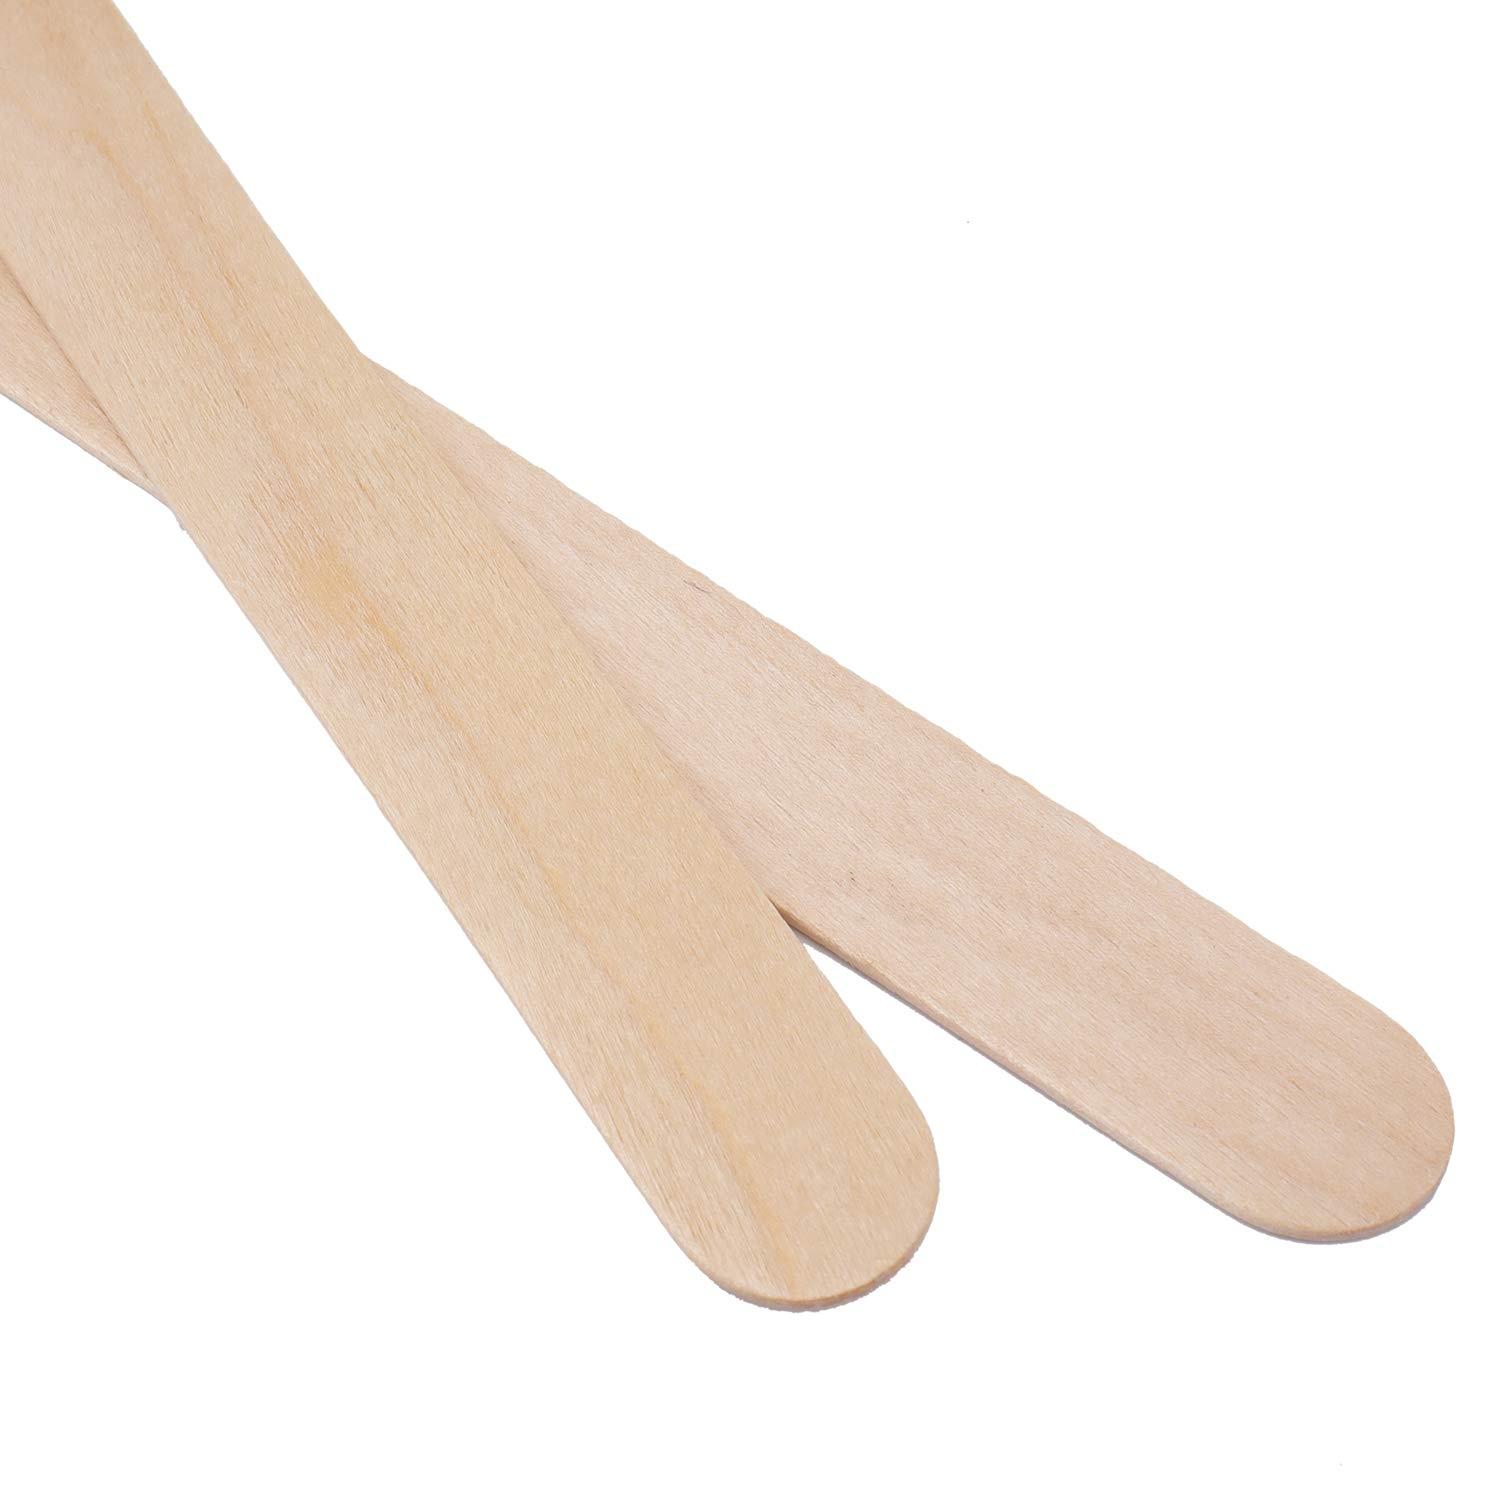 Makerstep Jumbo 6 Inch Wooden Multi-Purpose Wax Sticks. 6 Inch Professional  Large Popsicle Sticks Applicator Spatulas for Waxing, Ideal for Body, Hair